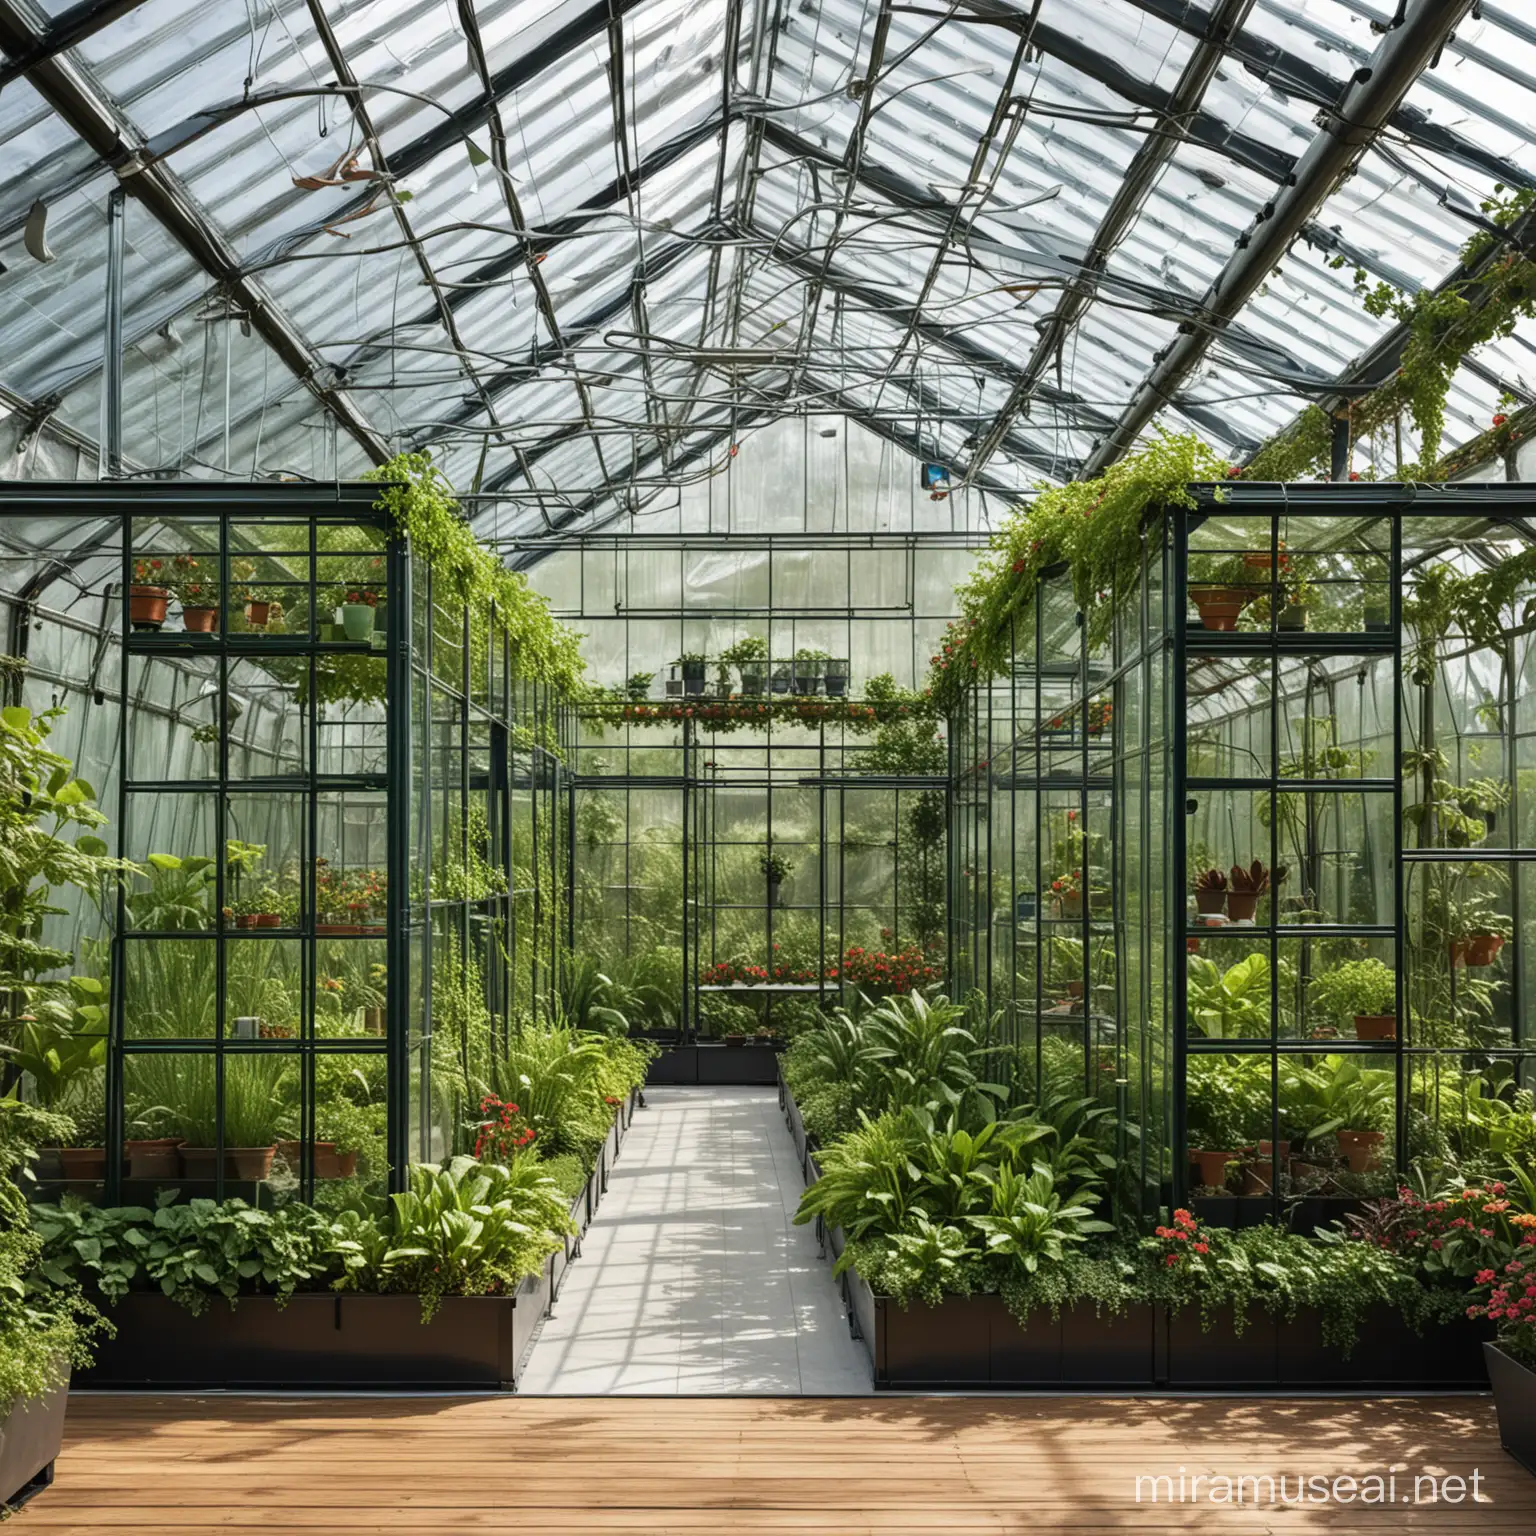 imagine a modern large green house with vertical gardens and plant beds of polycarbonate sheeting and galvanised steel structure